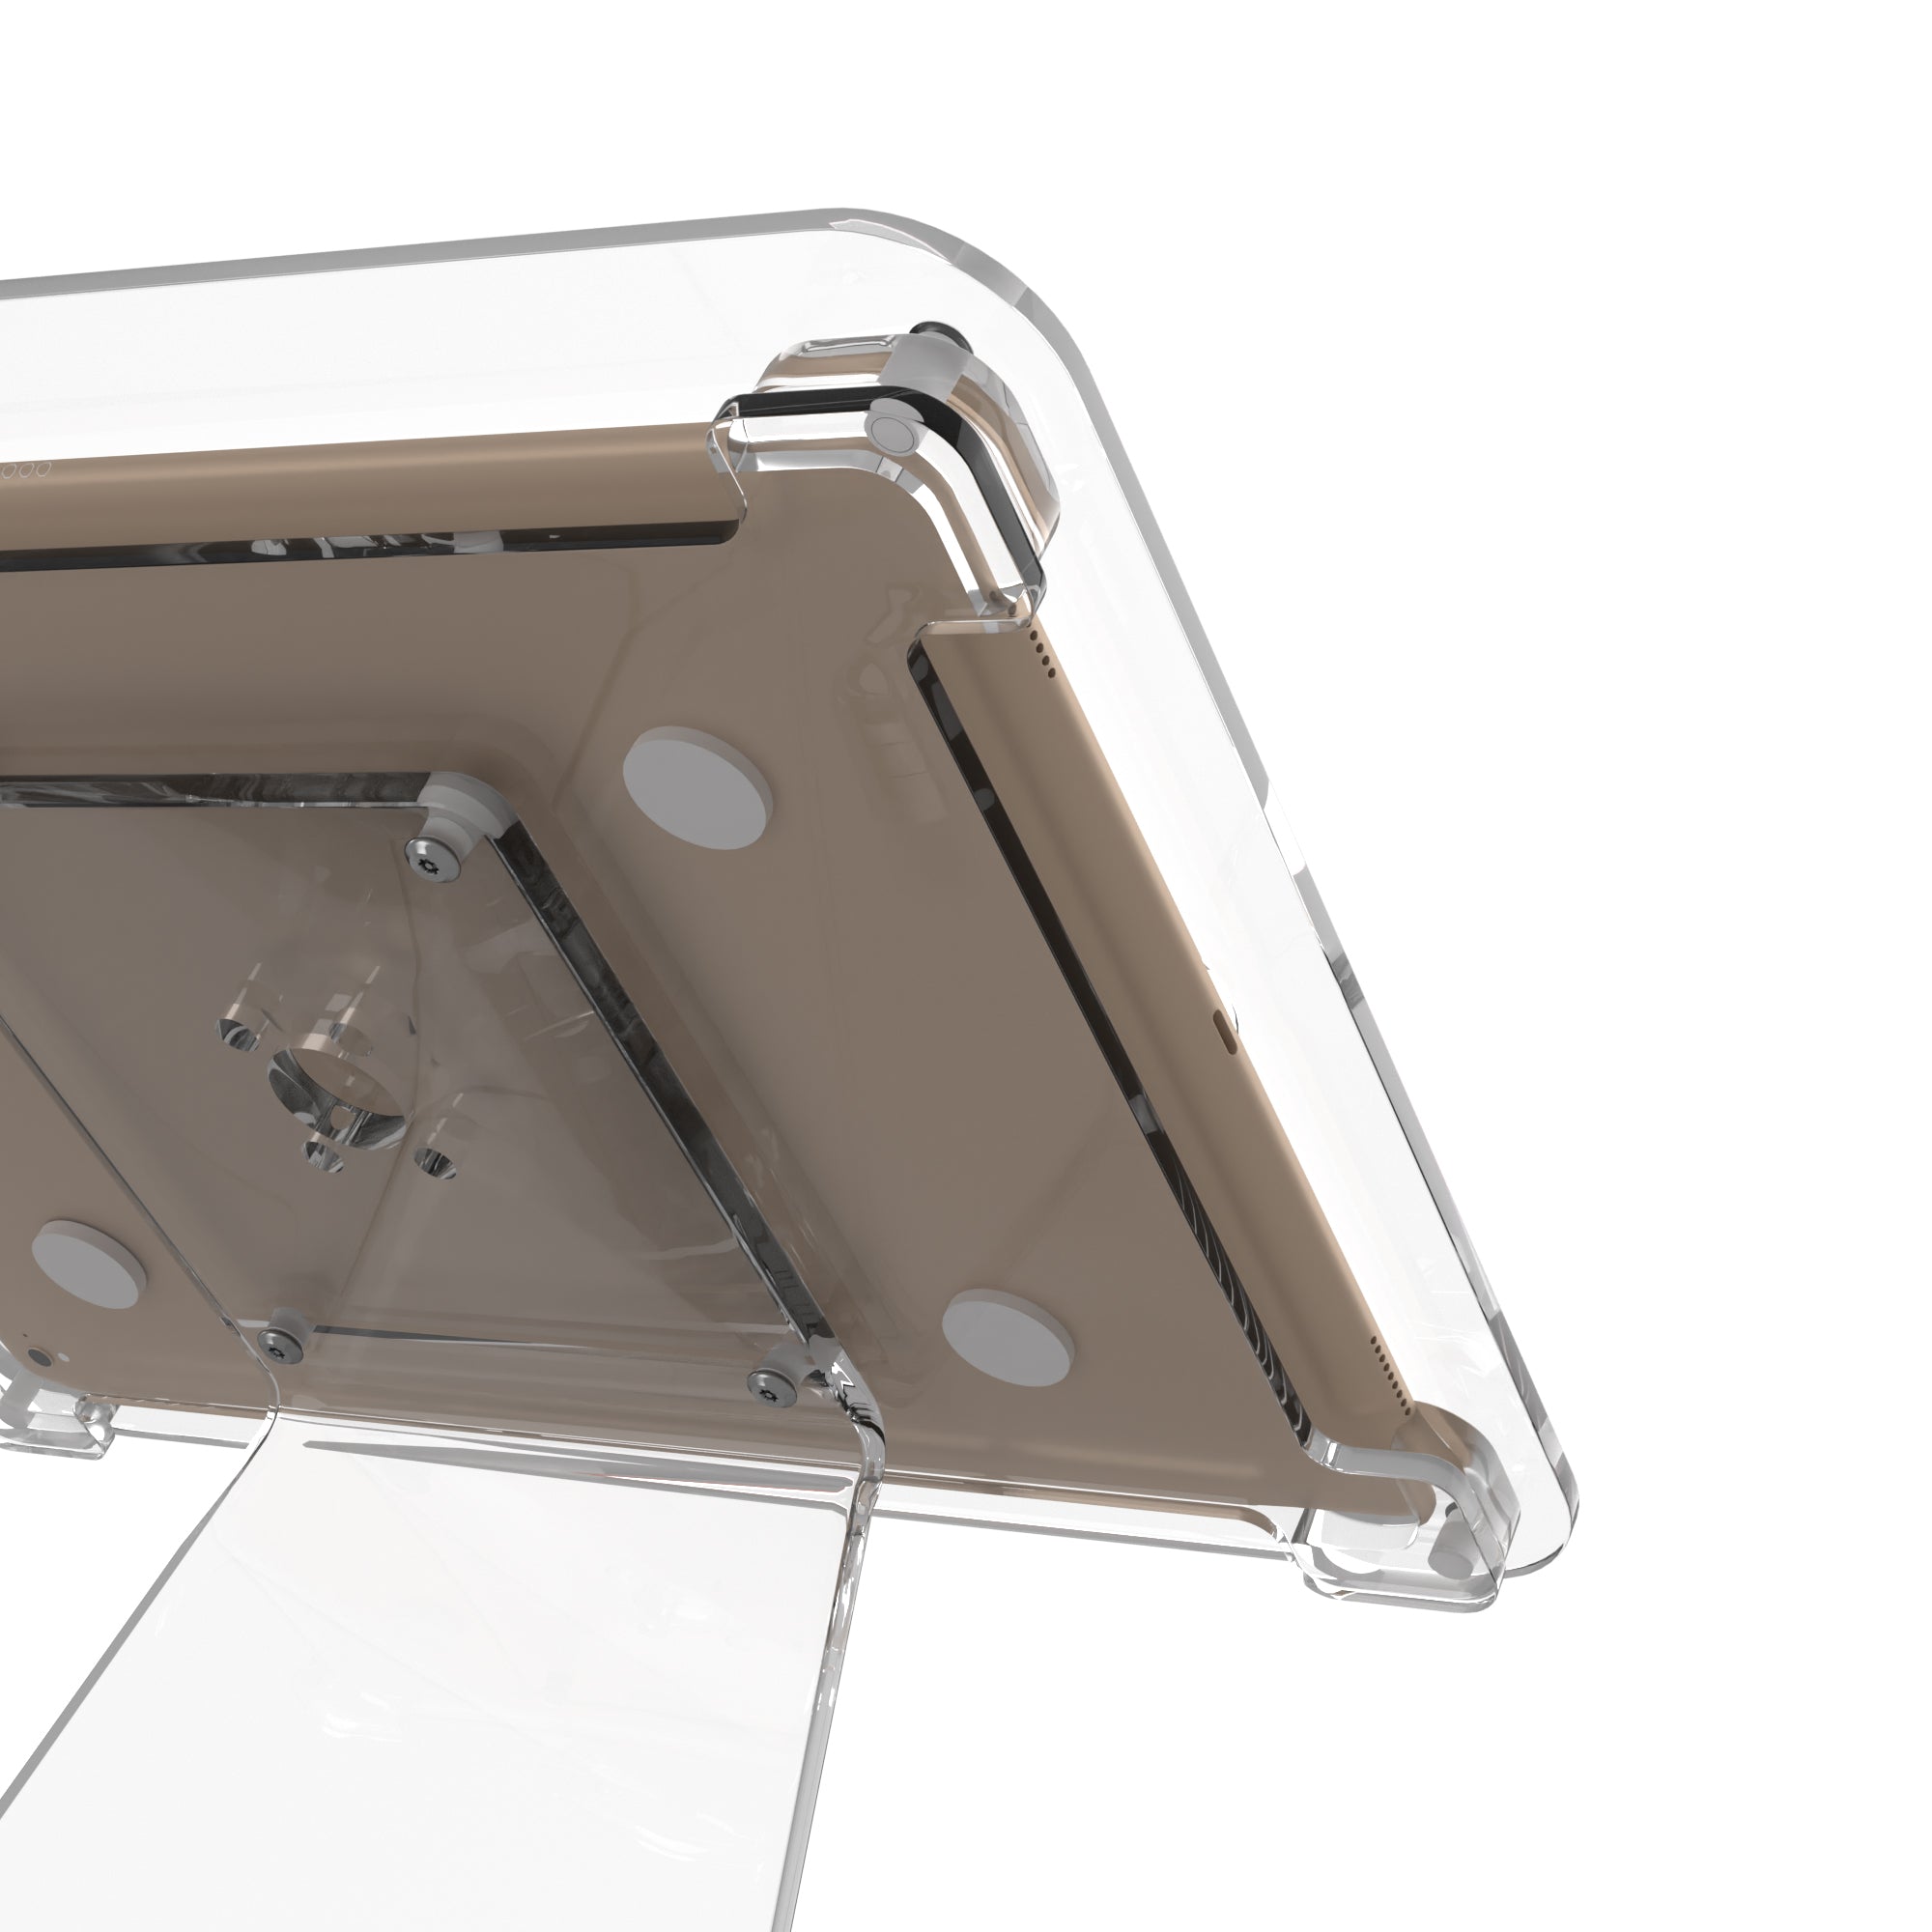 Premium Security Translucent Acrylic Kiosk for 10.2-inch iPad (7th/ 8th/ 9th Gen) &amp; More